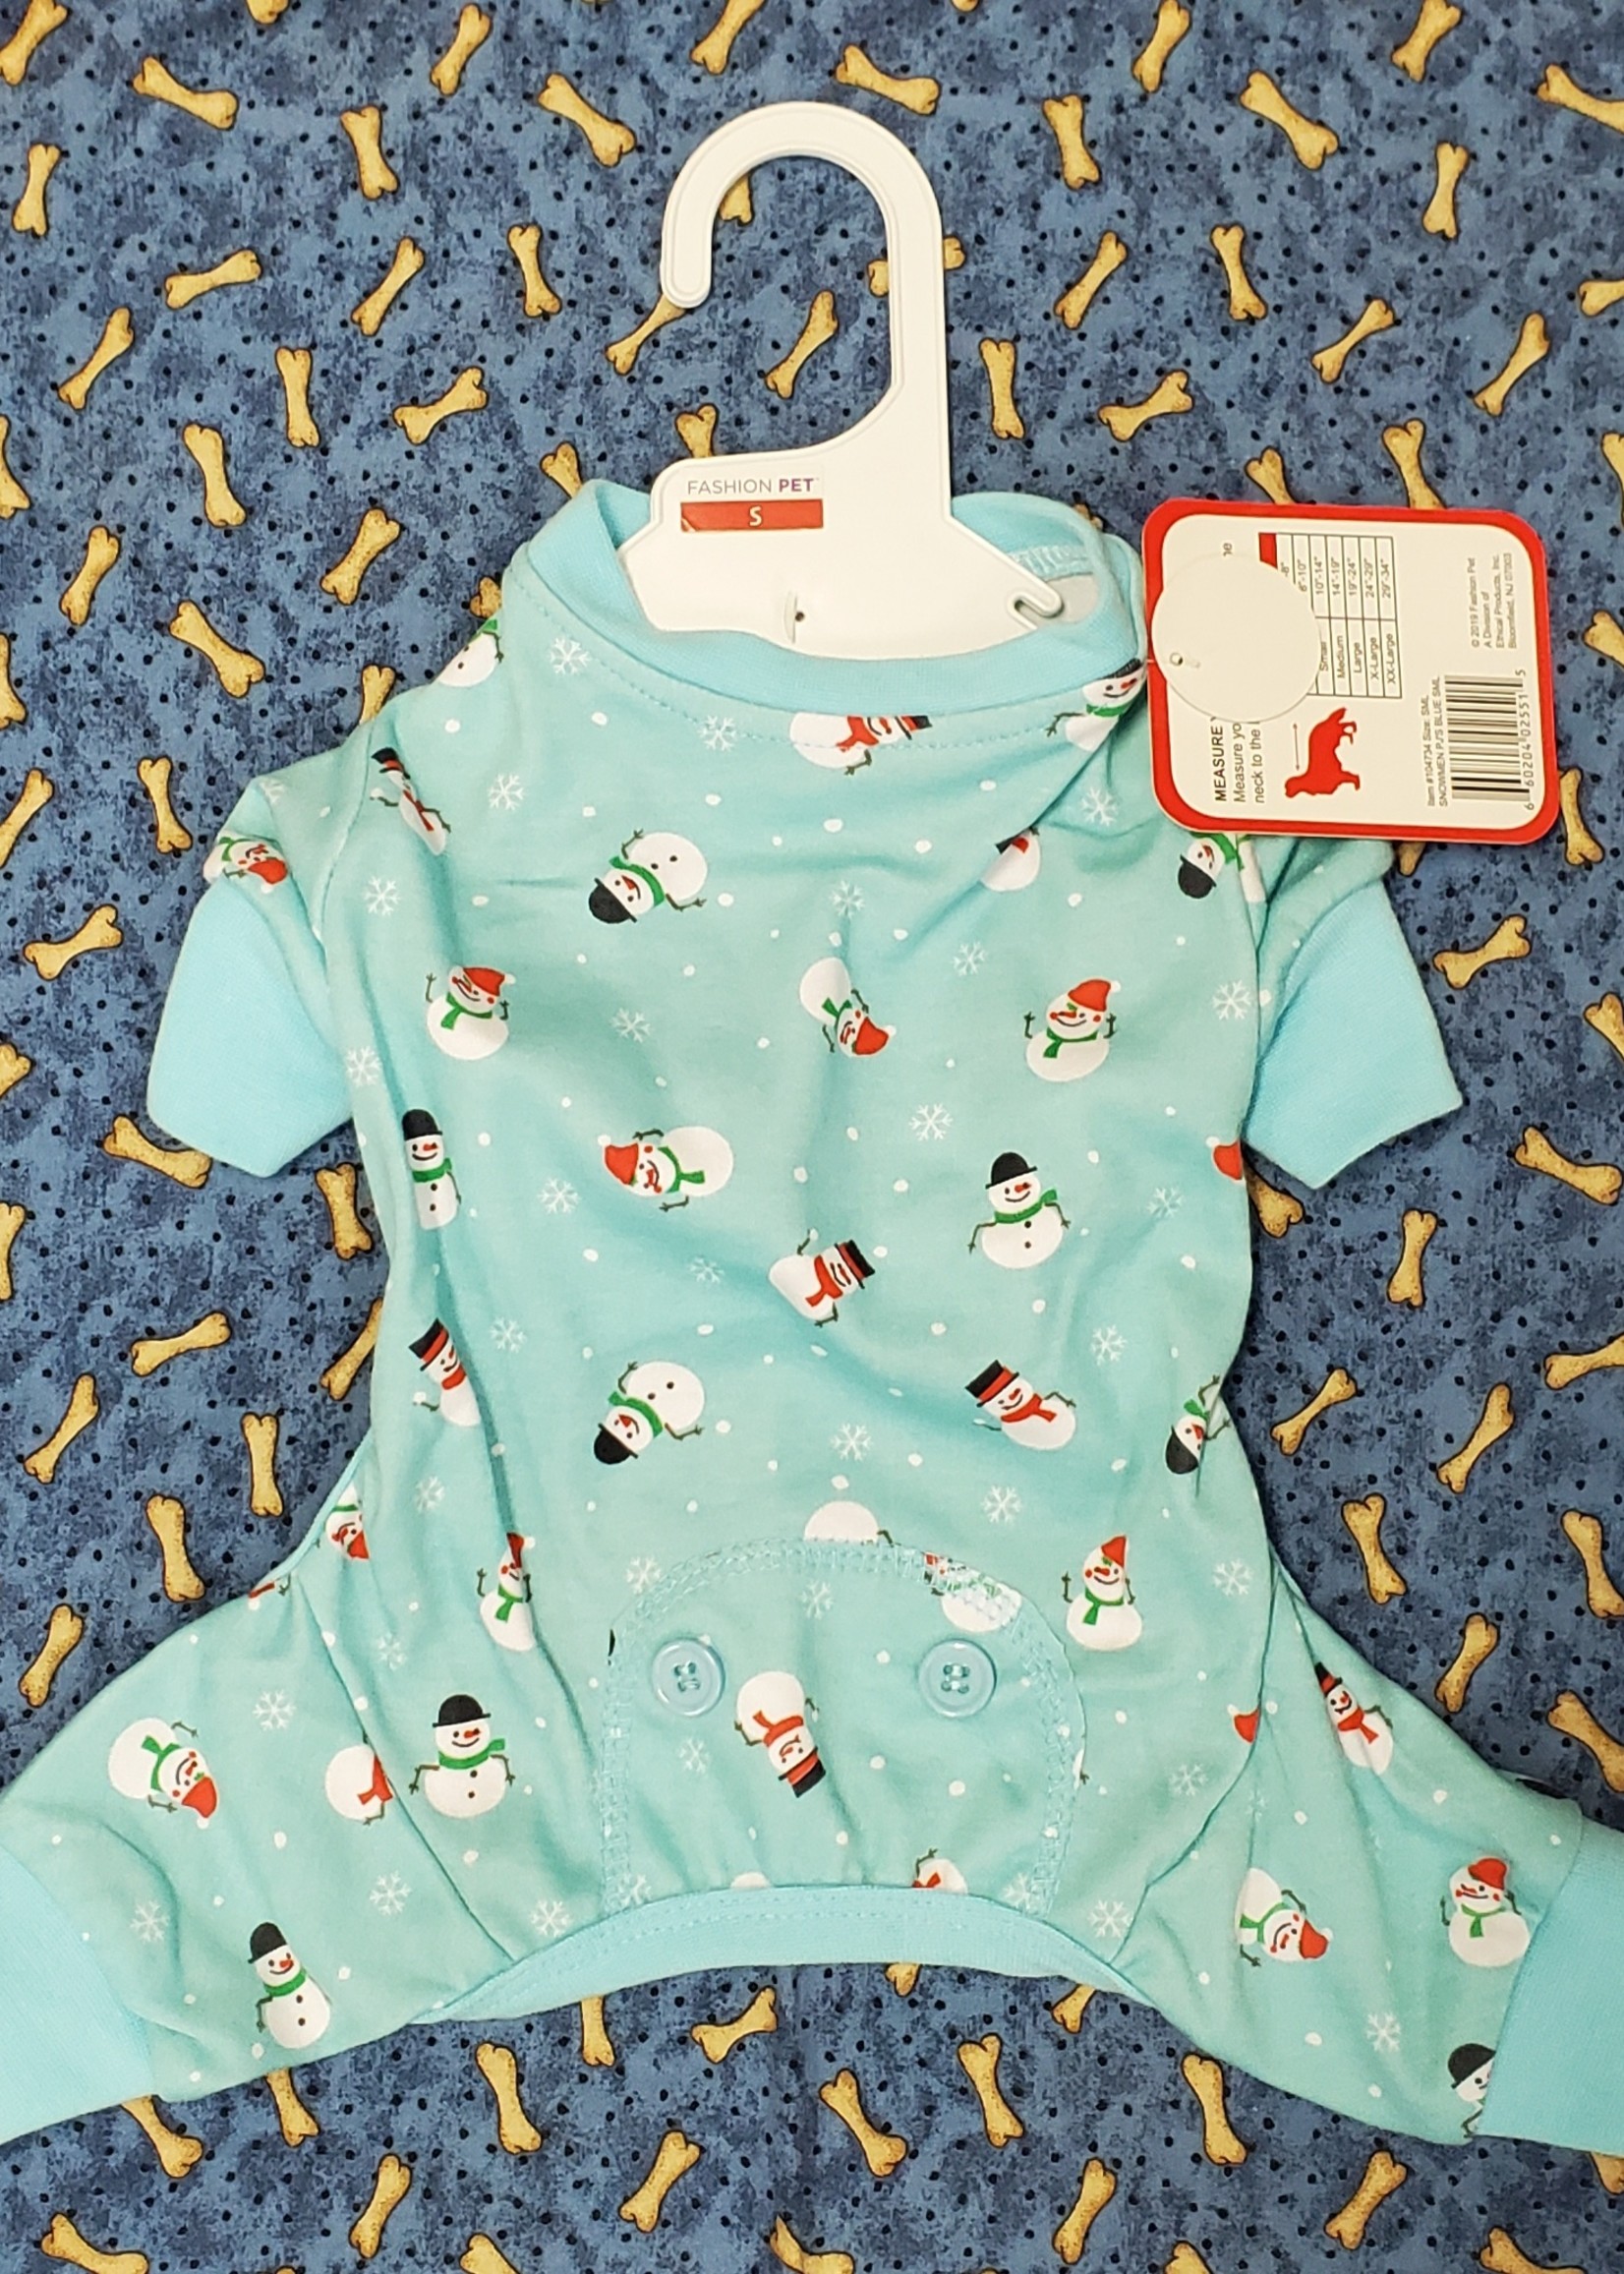 ETHICAL PRODUCTS INC EP PJ'S HOLIDAY SNOWMEN BLUE LG